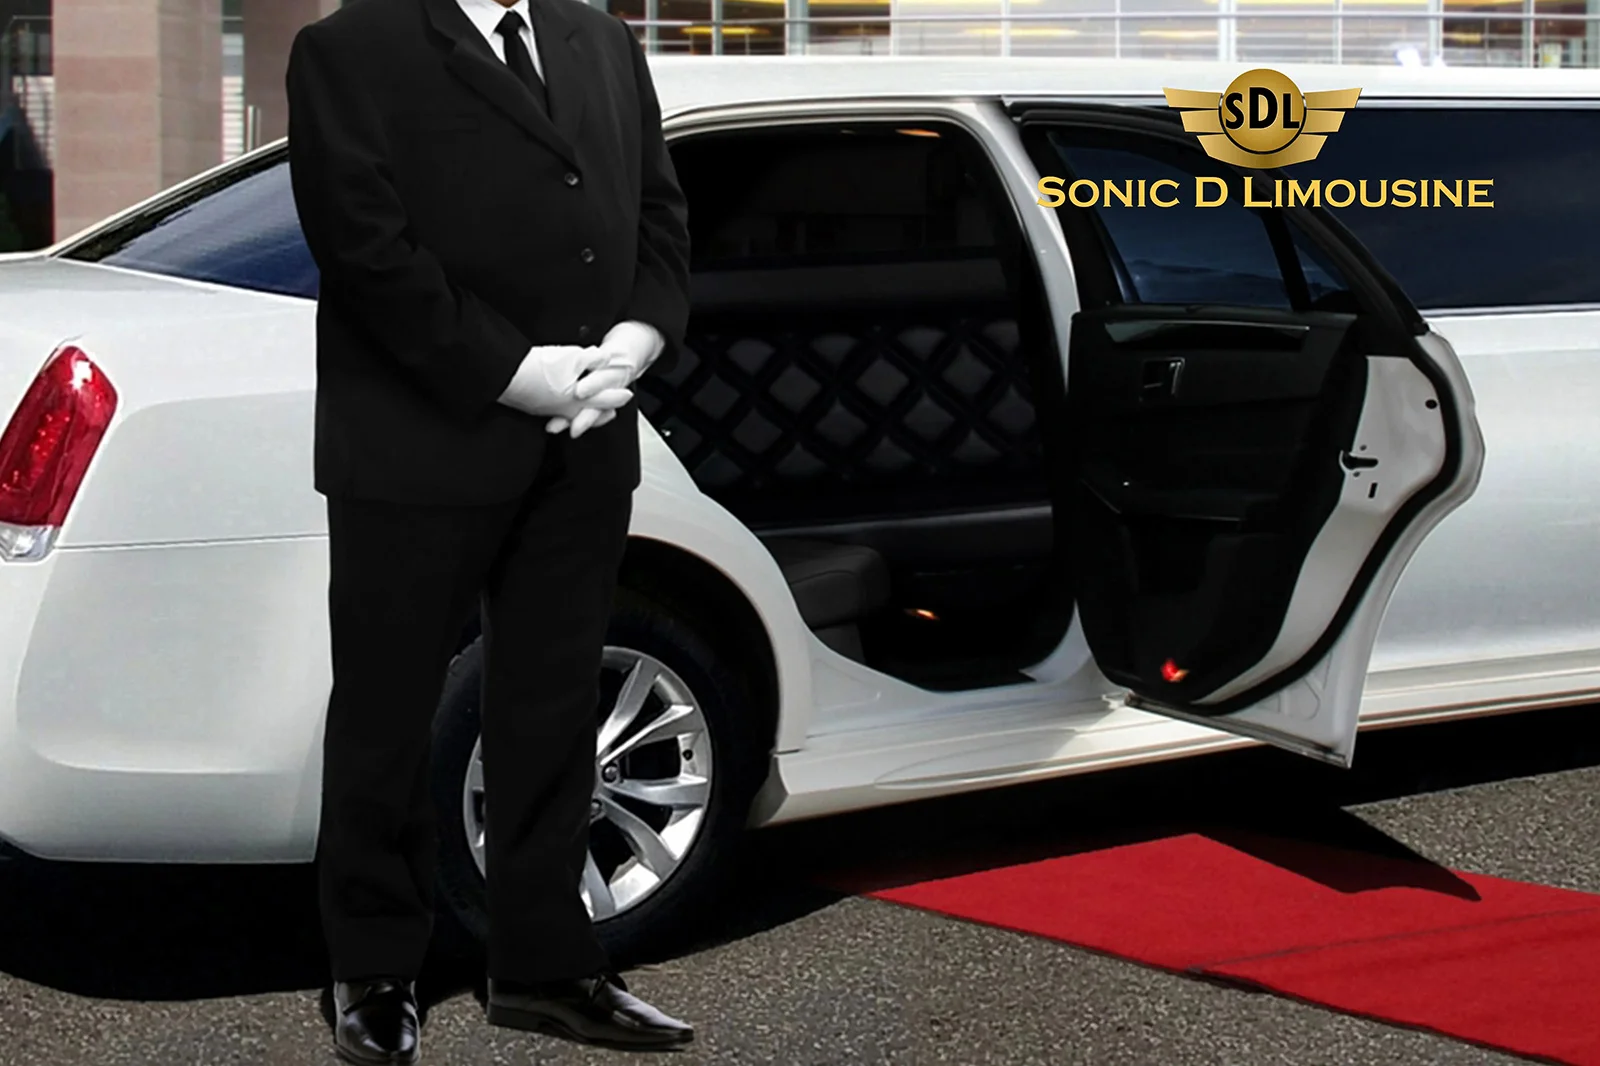 Sonic D Limousine A man in a suit standing next to a limo.